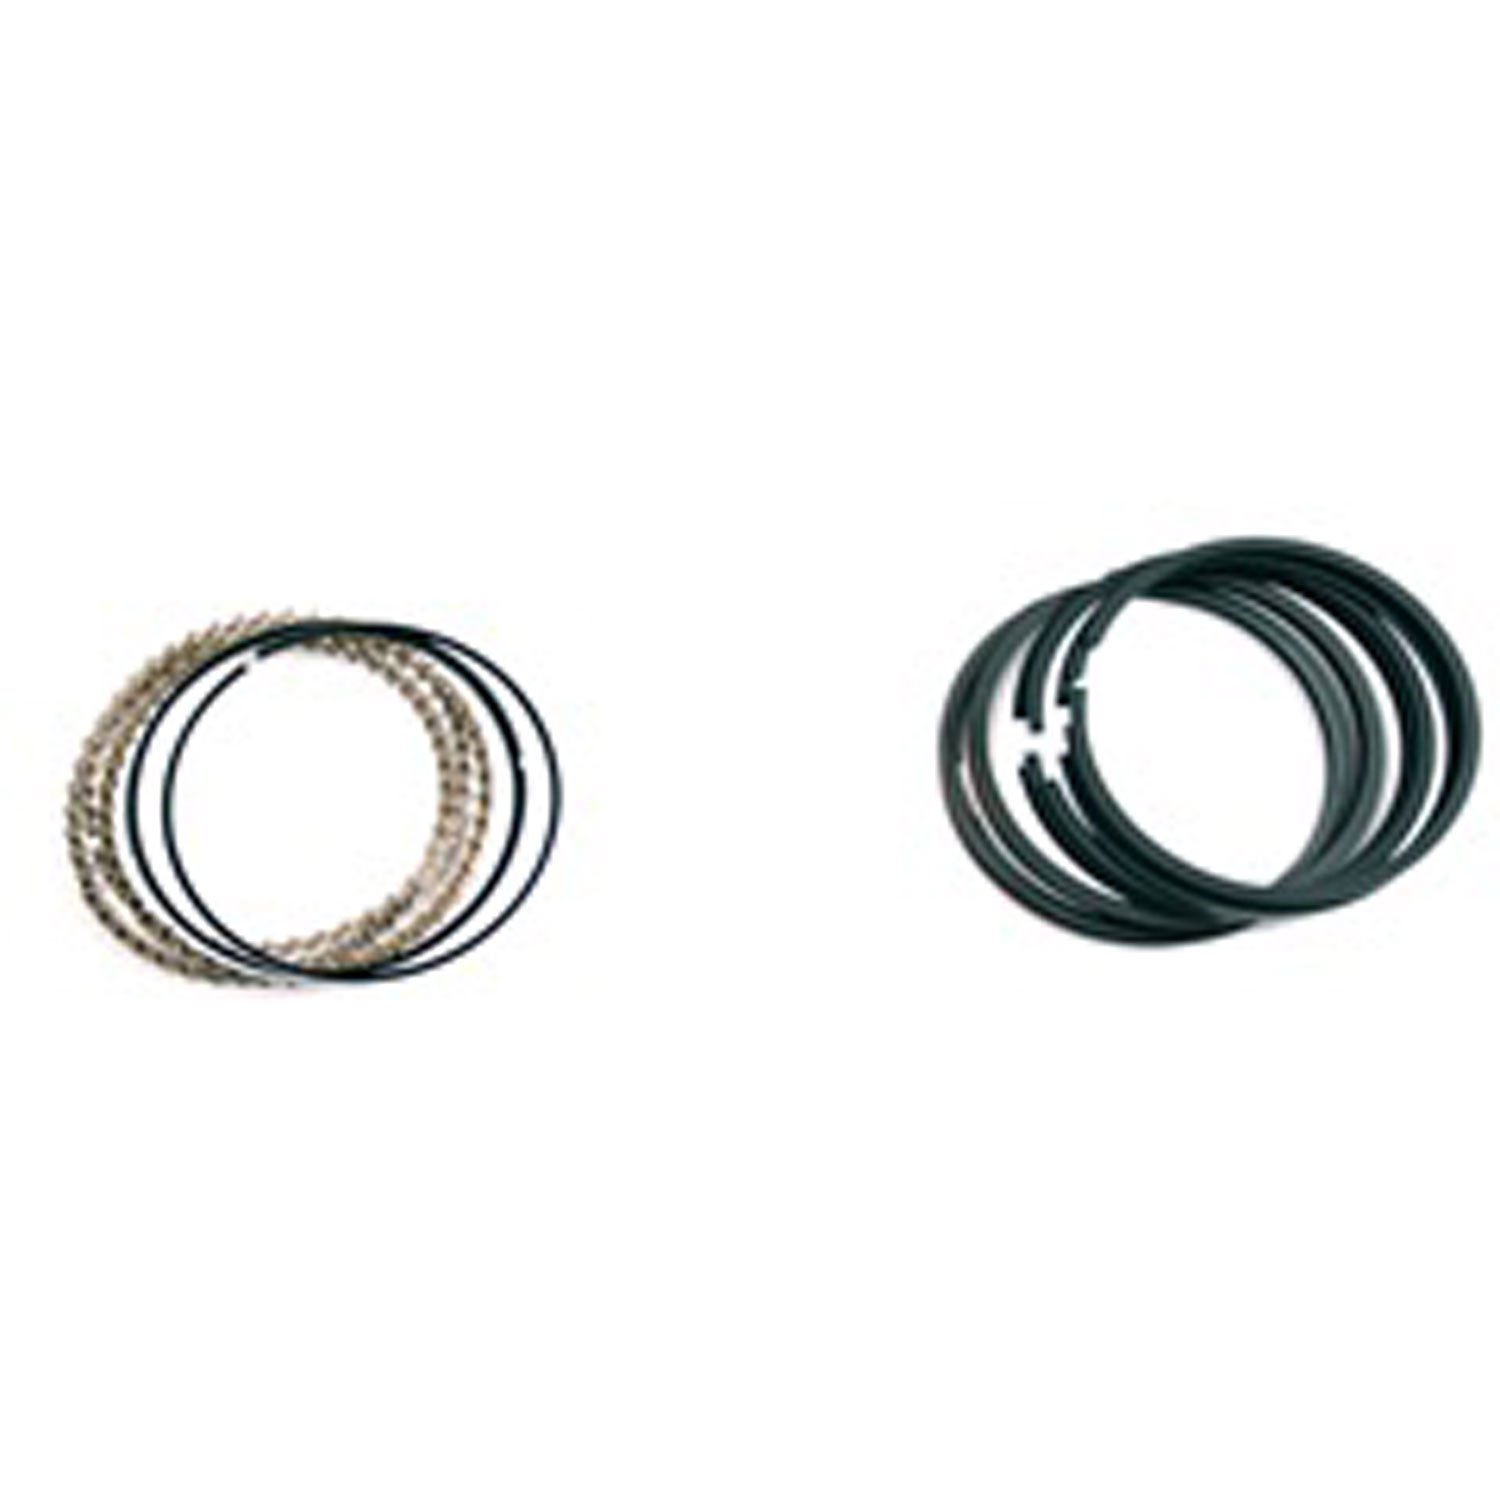 This piston ring set from Omix-ADA fits 4.7L engines with a standard bore in 99-09 Jeep Grand Cherokees and 06-09 Commanders.